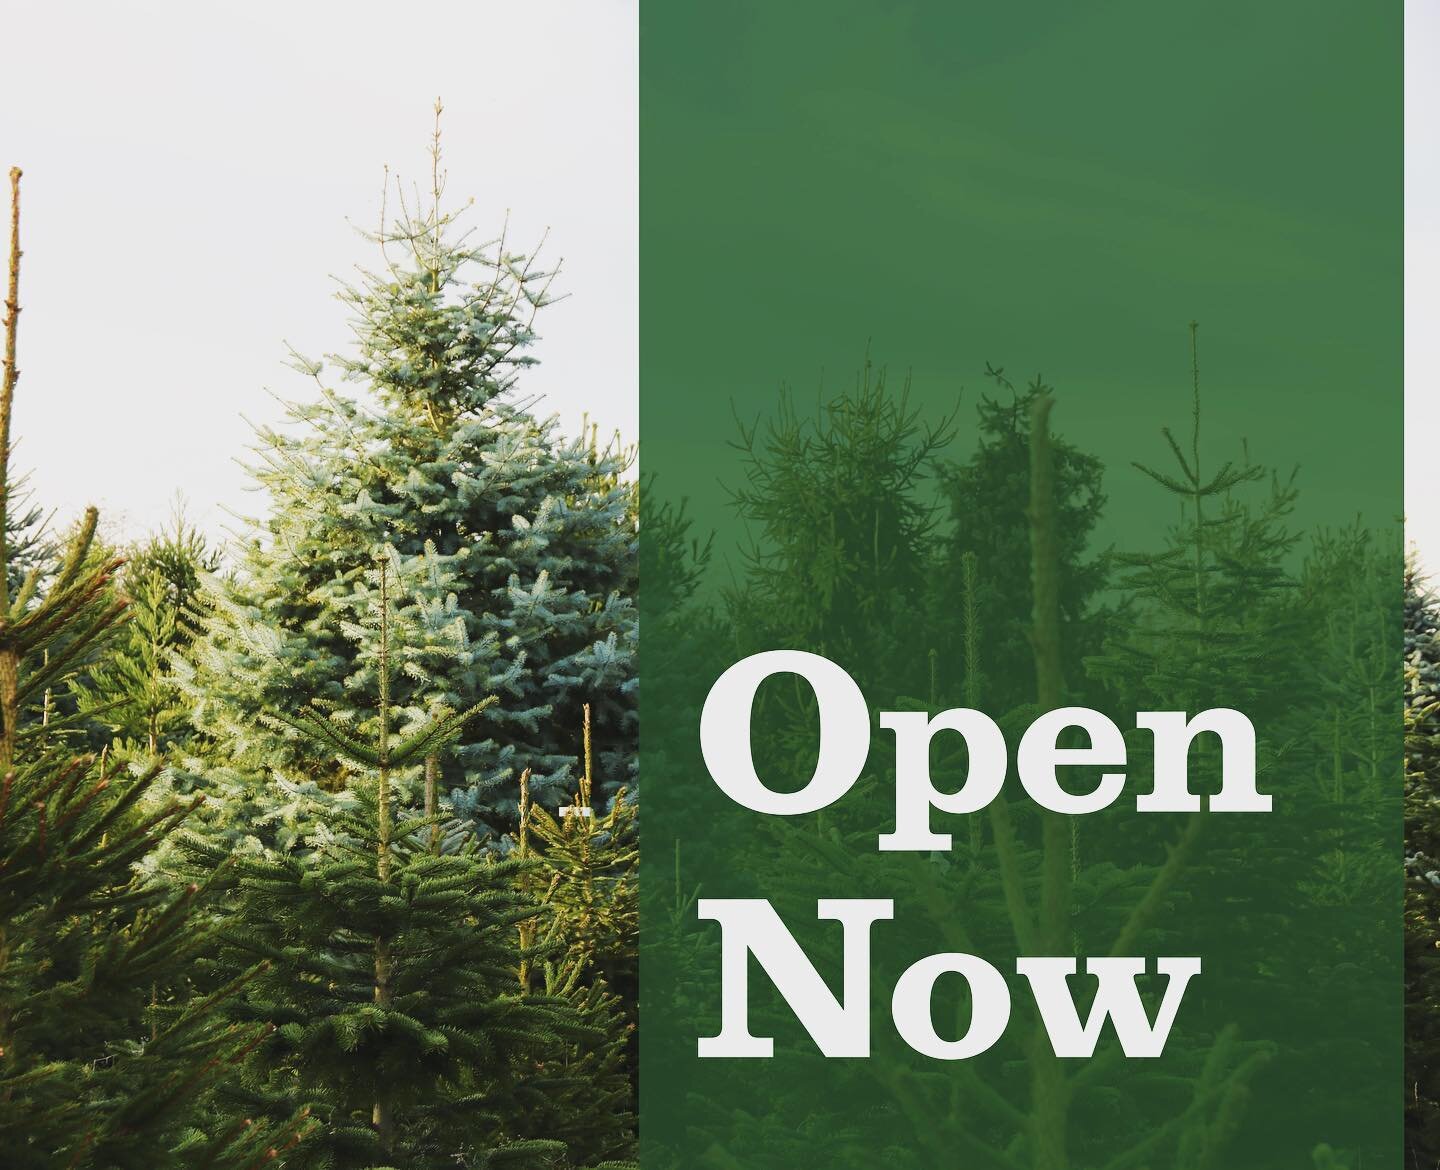 We are open now daily between 9 and 5 until Saturday 21st December. Come and join us to browse for your perfect tree 🌲 #snowbirdchristmastreefarm #buyreal #buybritish #stamford #christmastree #christmastreefarm #grantham #shoplocal #realtree #christ